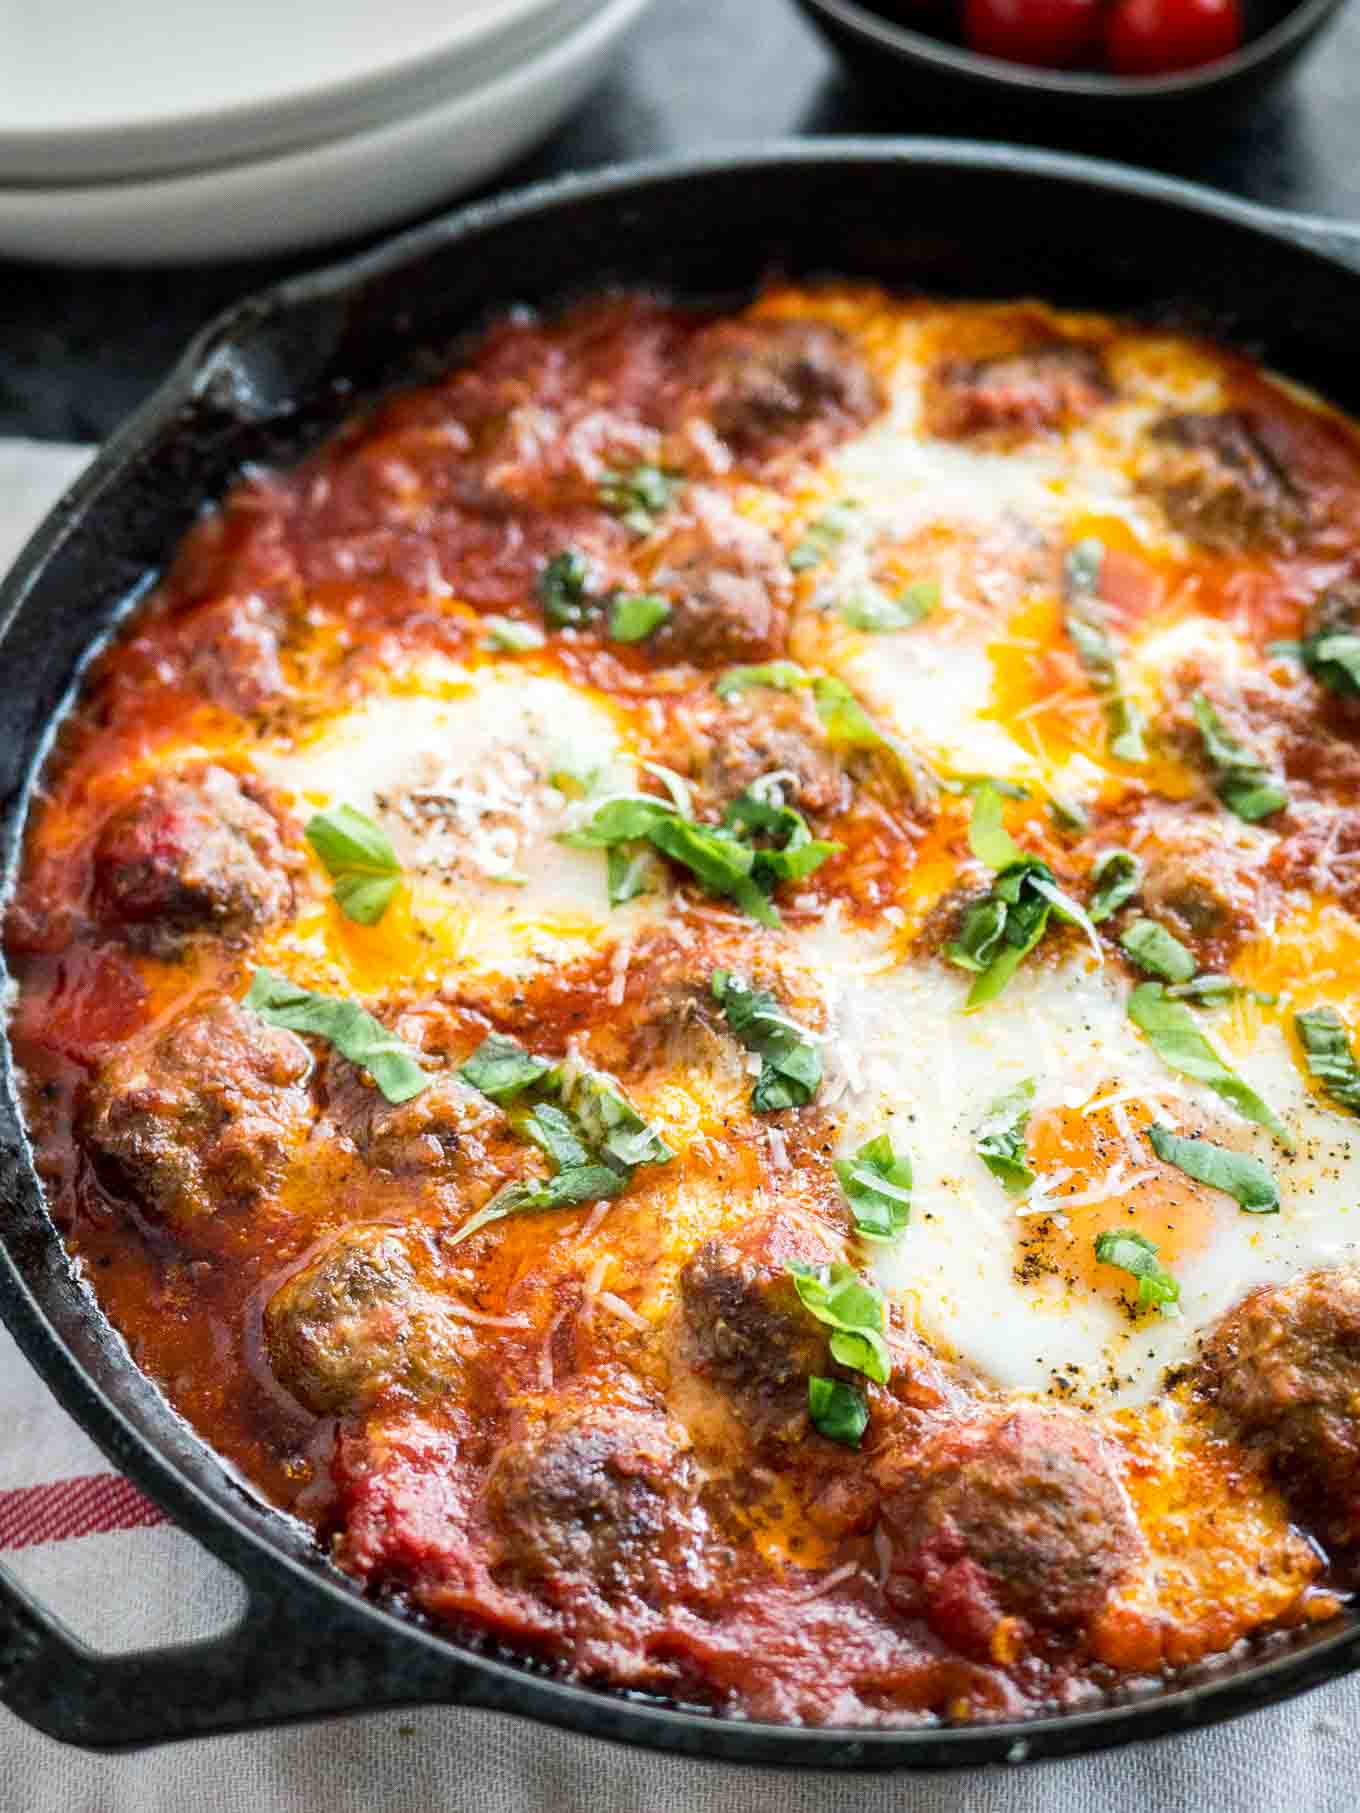 Close-up shot of Italian baked eggs and meatballs garnished with parsley in a cast iron pan on a white and red dishtowel.